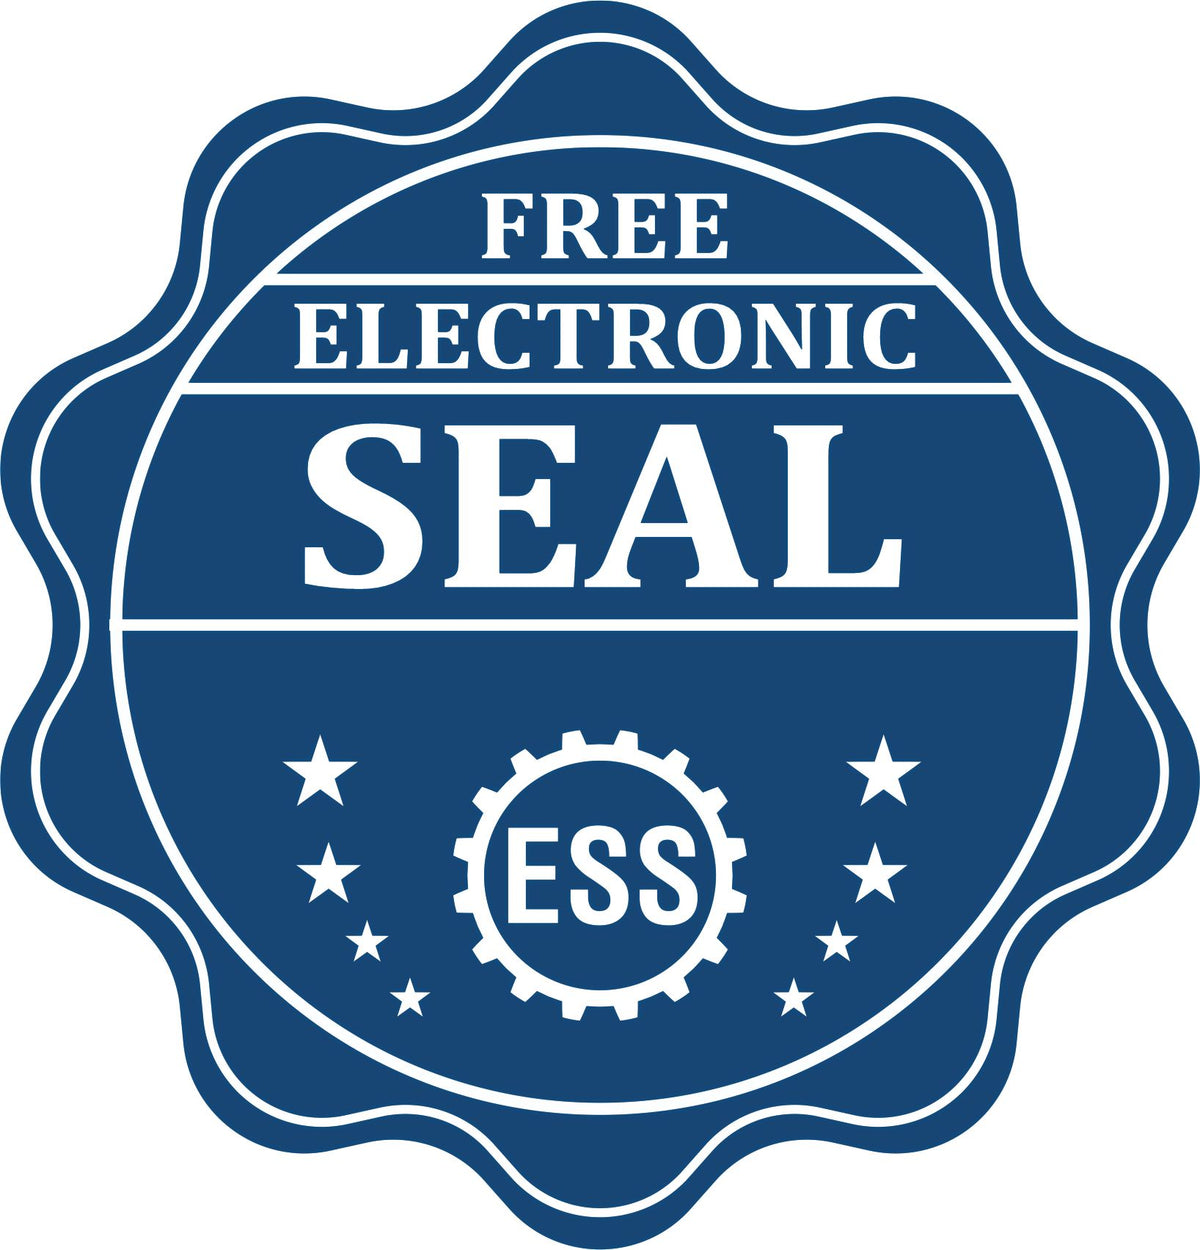 A badge showing a free electronic seal for the Soft Virginia Professional Geologist Seal with stars and the ESS gear on the emblem.